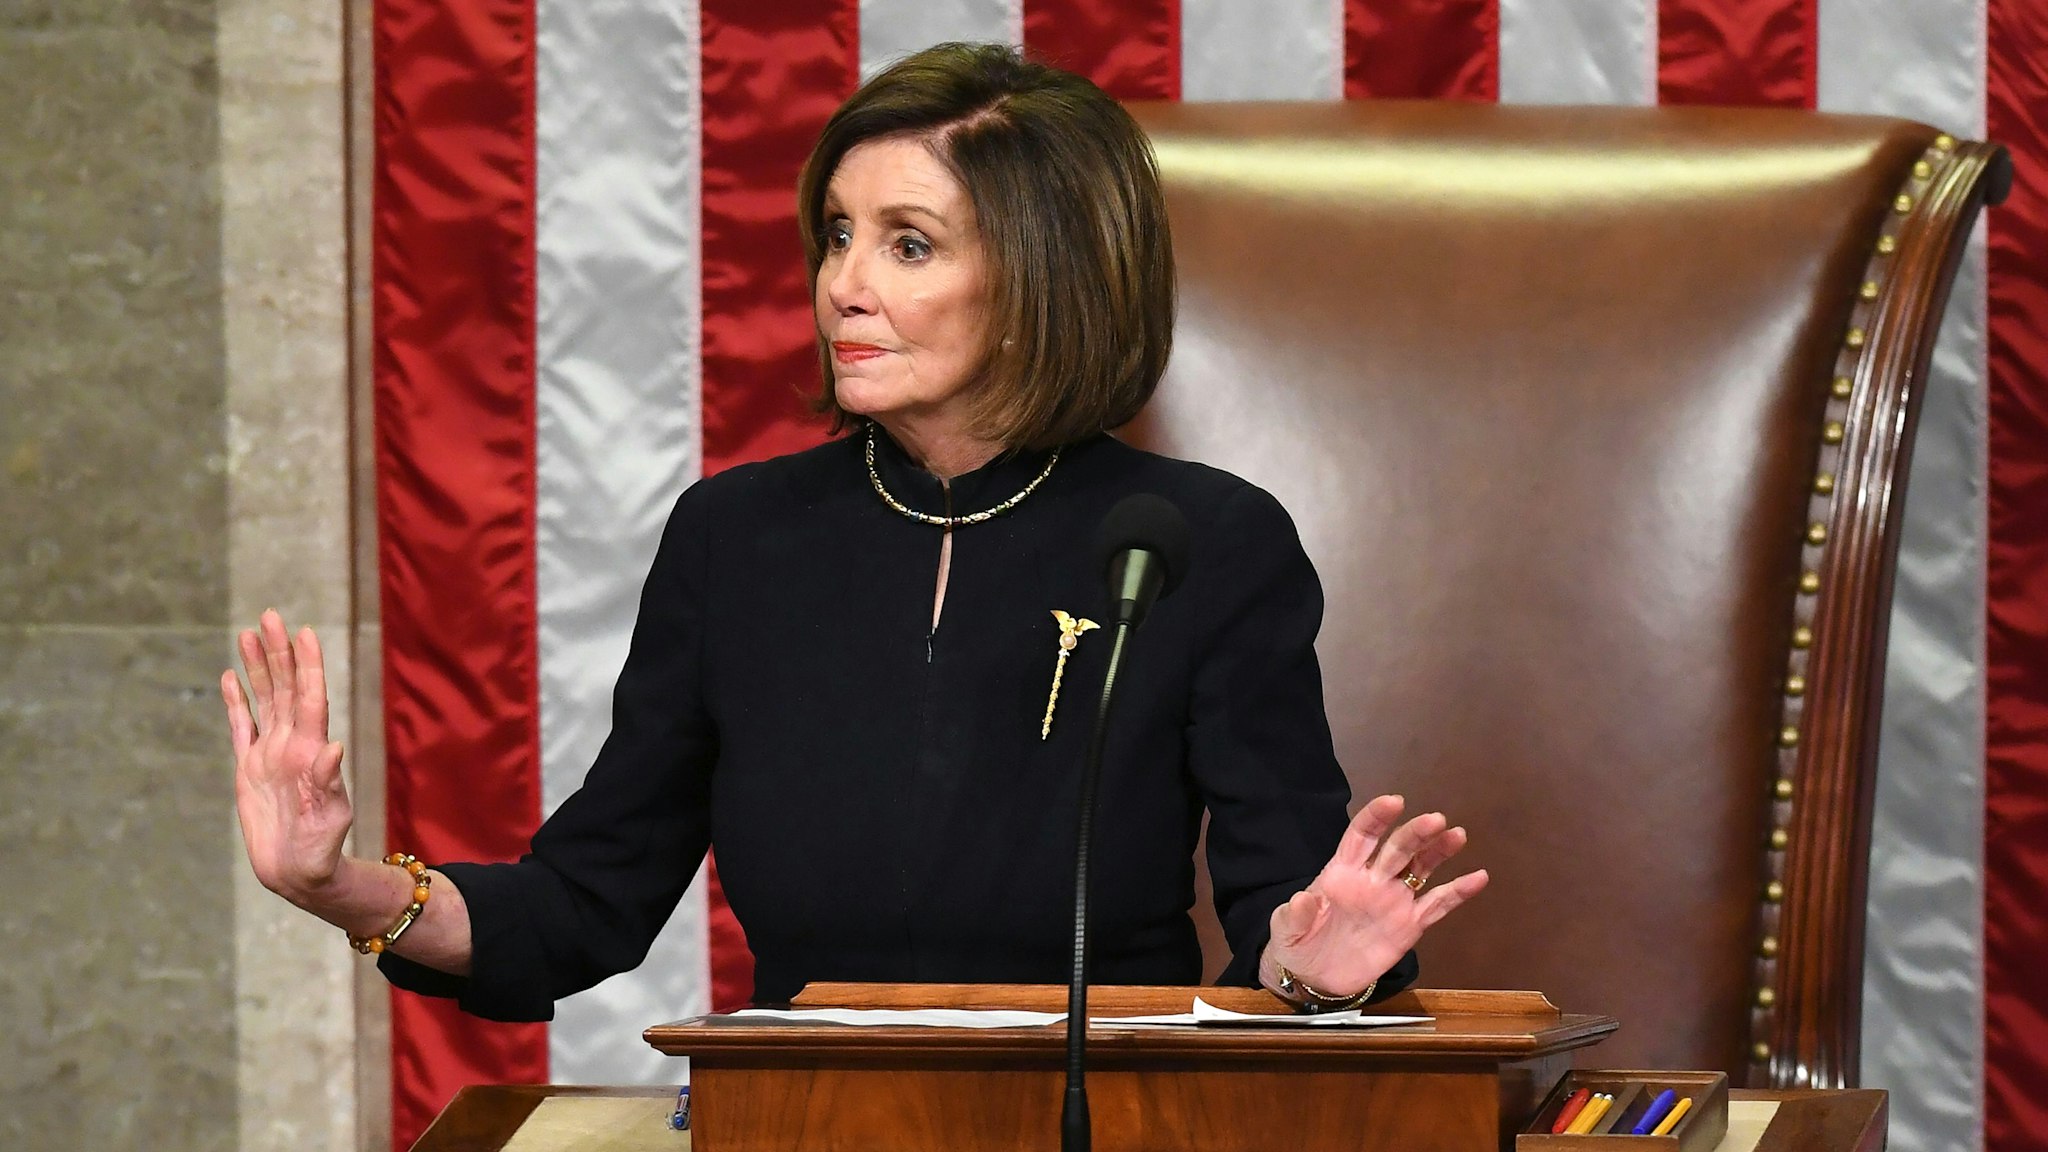 US Speaker of the House Nancy Pelosi presides over Resolution 755, Articles of Impeachment Against President Donald J. Trump as the House votes at the US Capitol in Washington, DC, on December 18, 2019. - The US House of Representatives voted 229-198 on Wednesday to impeach President Donald Trump for obstruction of Congress. The House impeached Trump for abuse of power by a 230-197 vote. The 45th US president is just the third occupant of the White House in US history to be impeached.